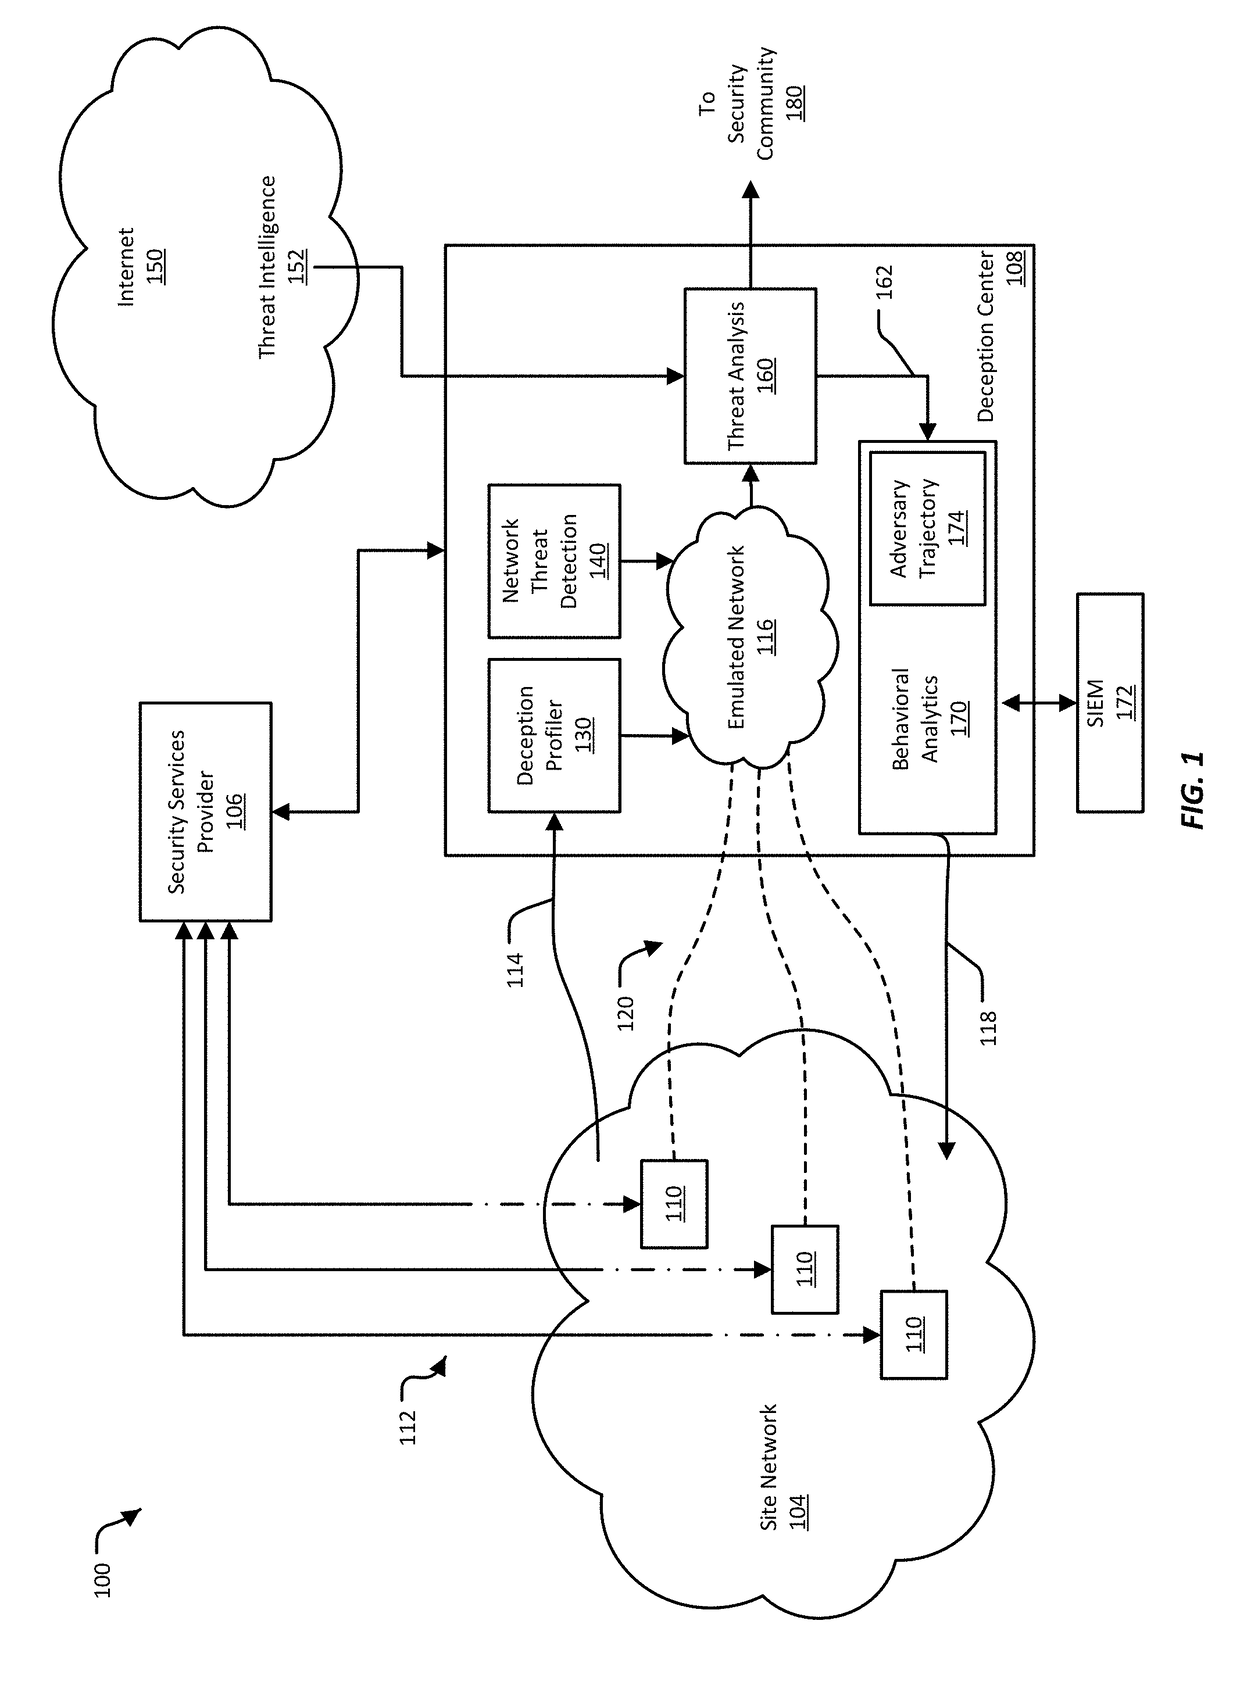 Systems and Methods for Detecting and Tracking Adversary Trajectory